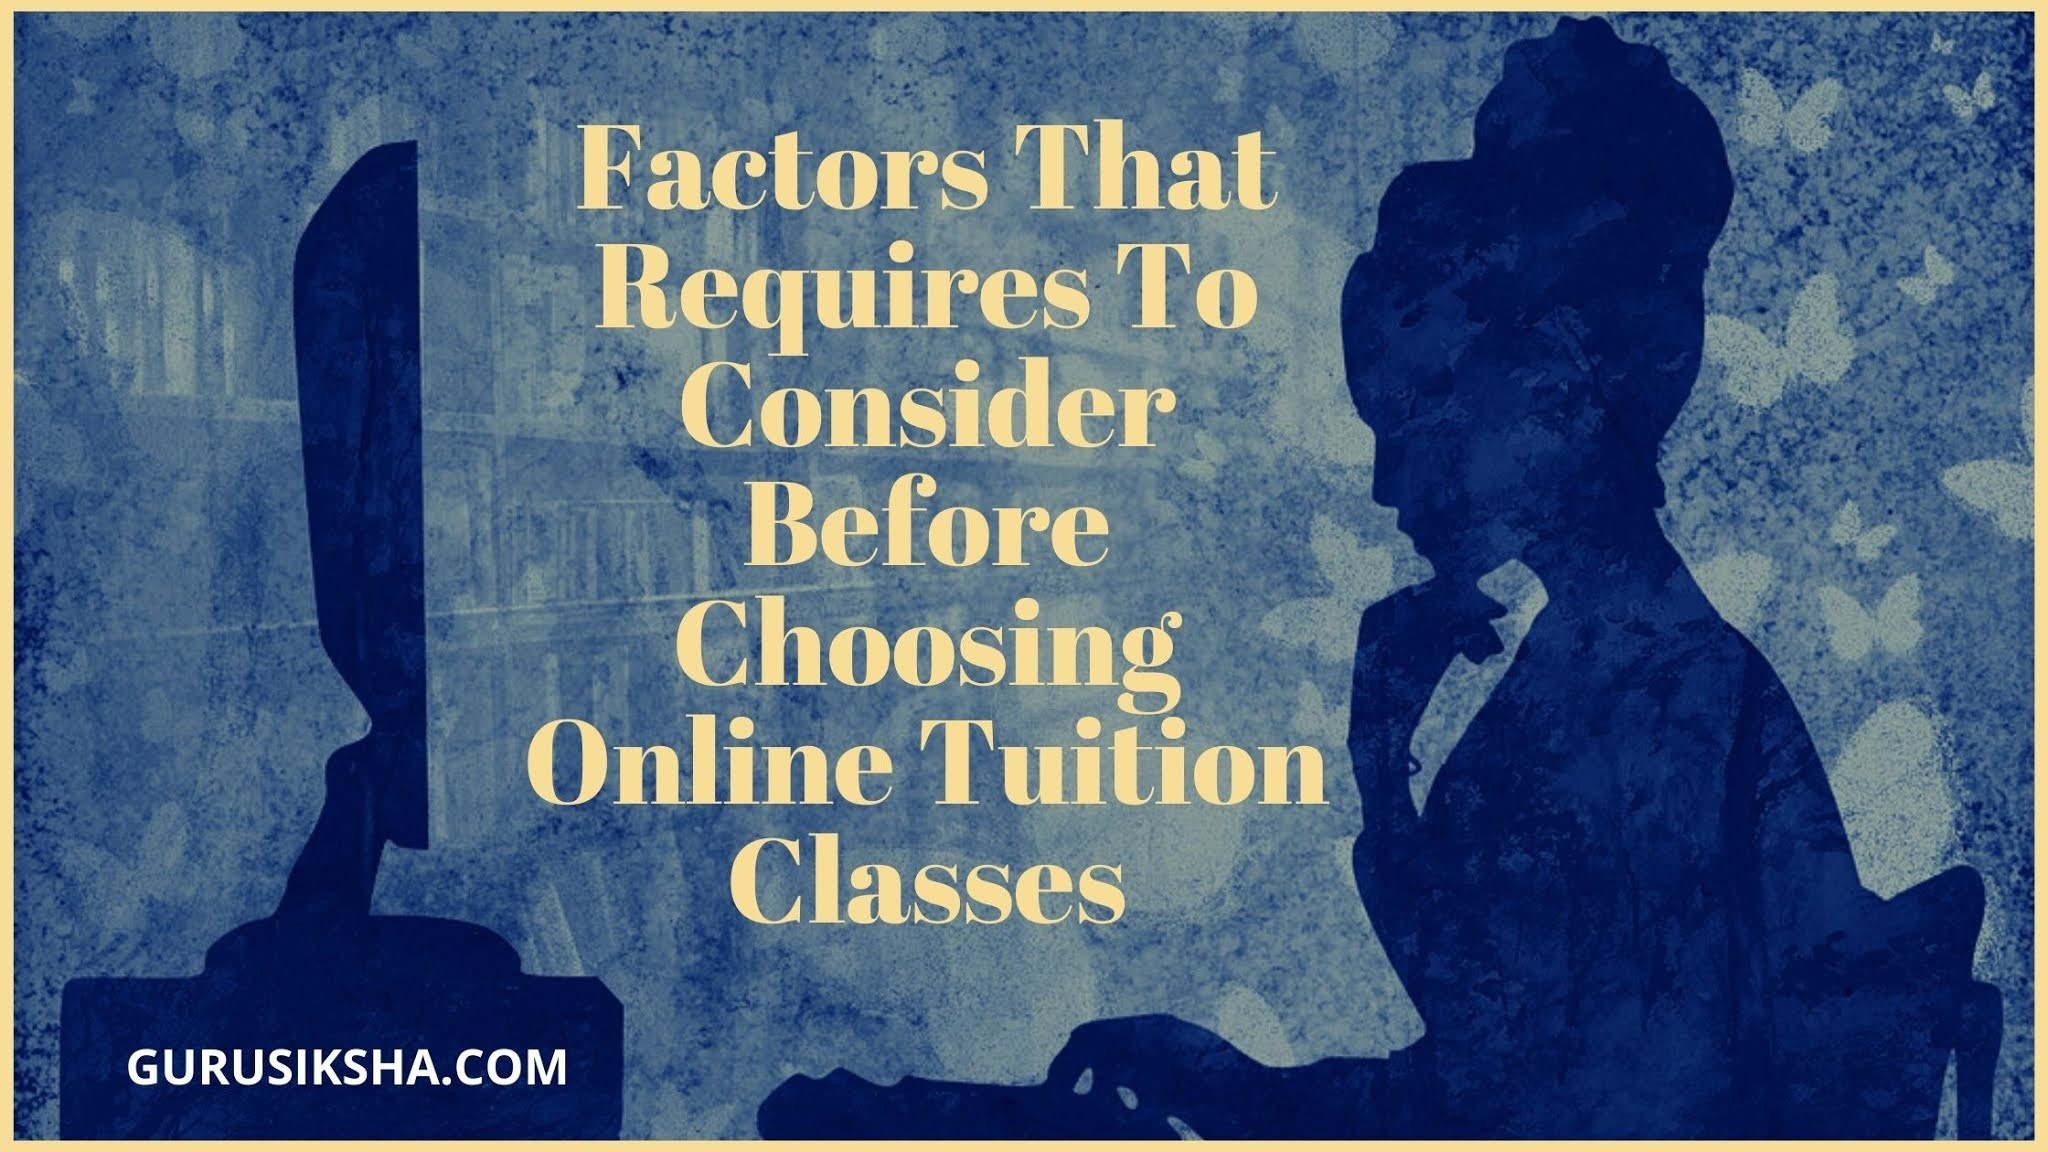 Online Tuition Classes: Top 5 Things To Check Before Choosing One